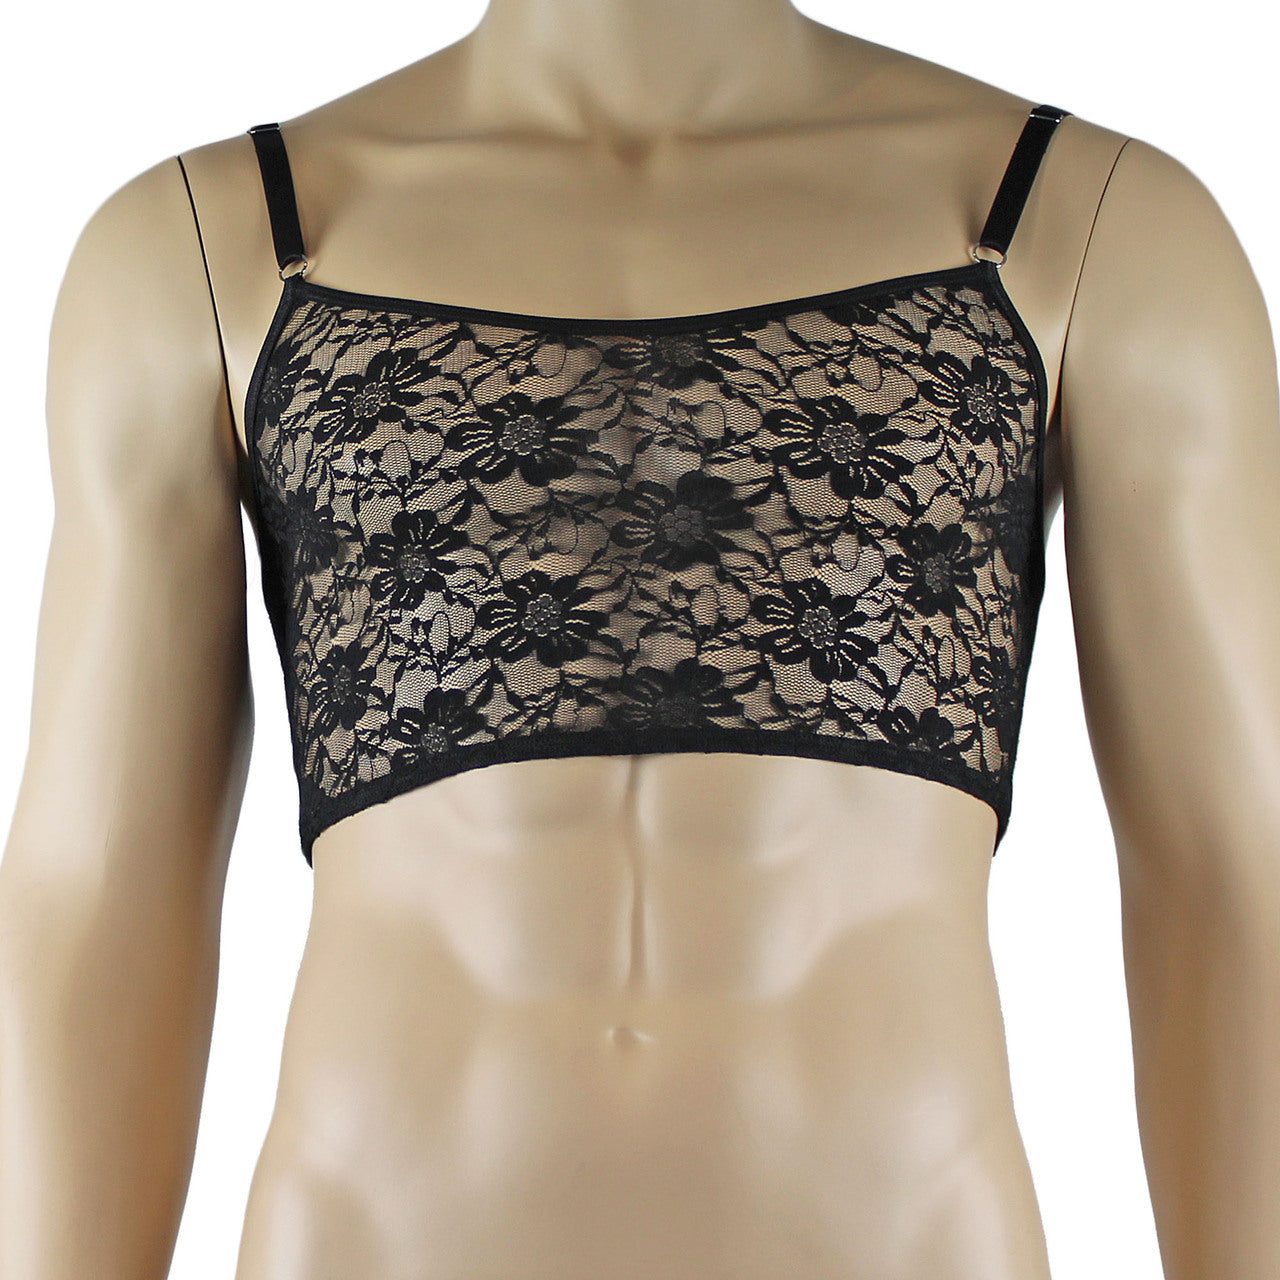 Mens Lace Crop Top Bra and Matching Lace Thong (black plus other colours)